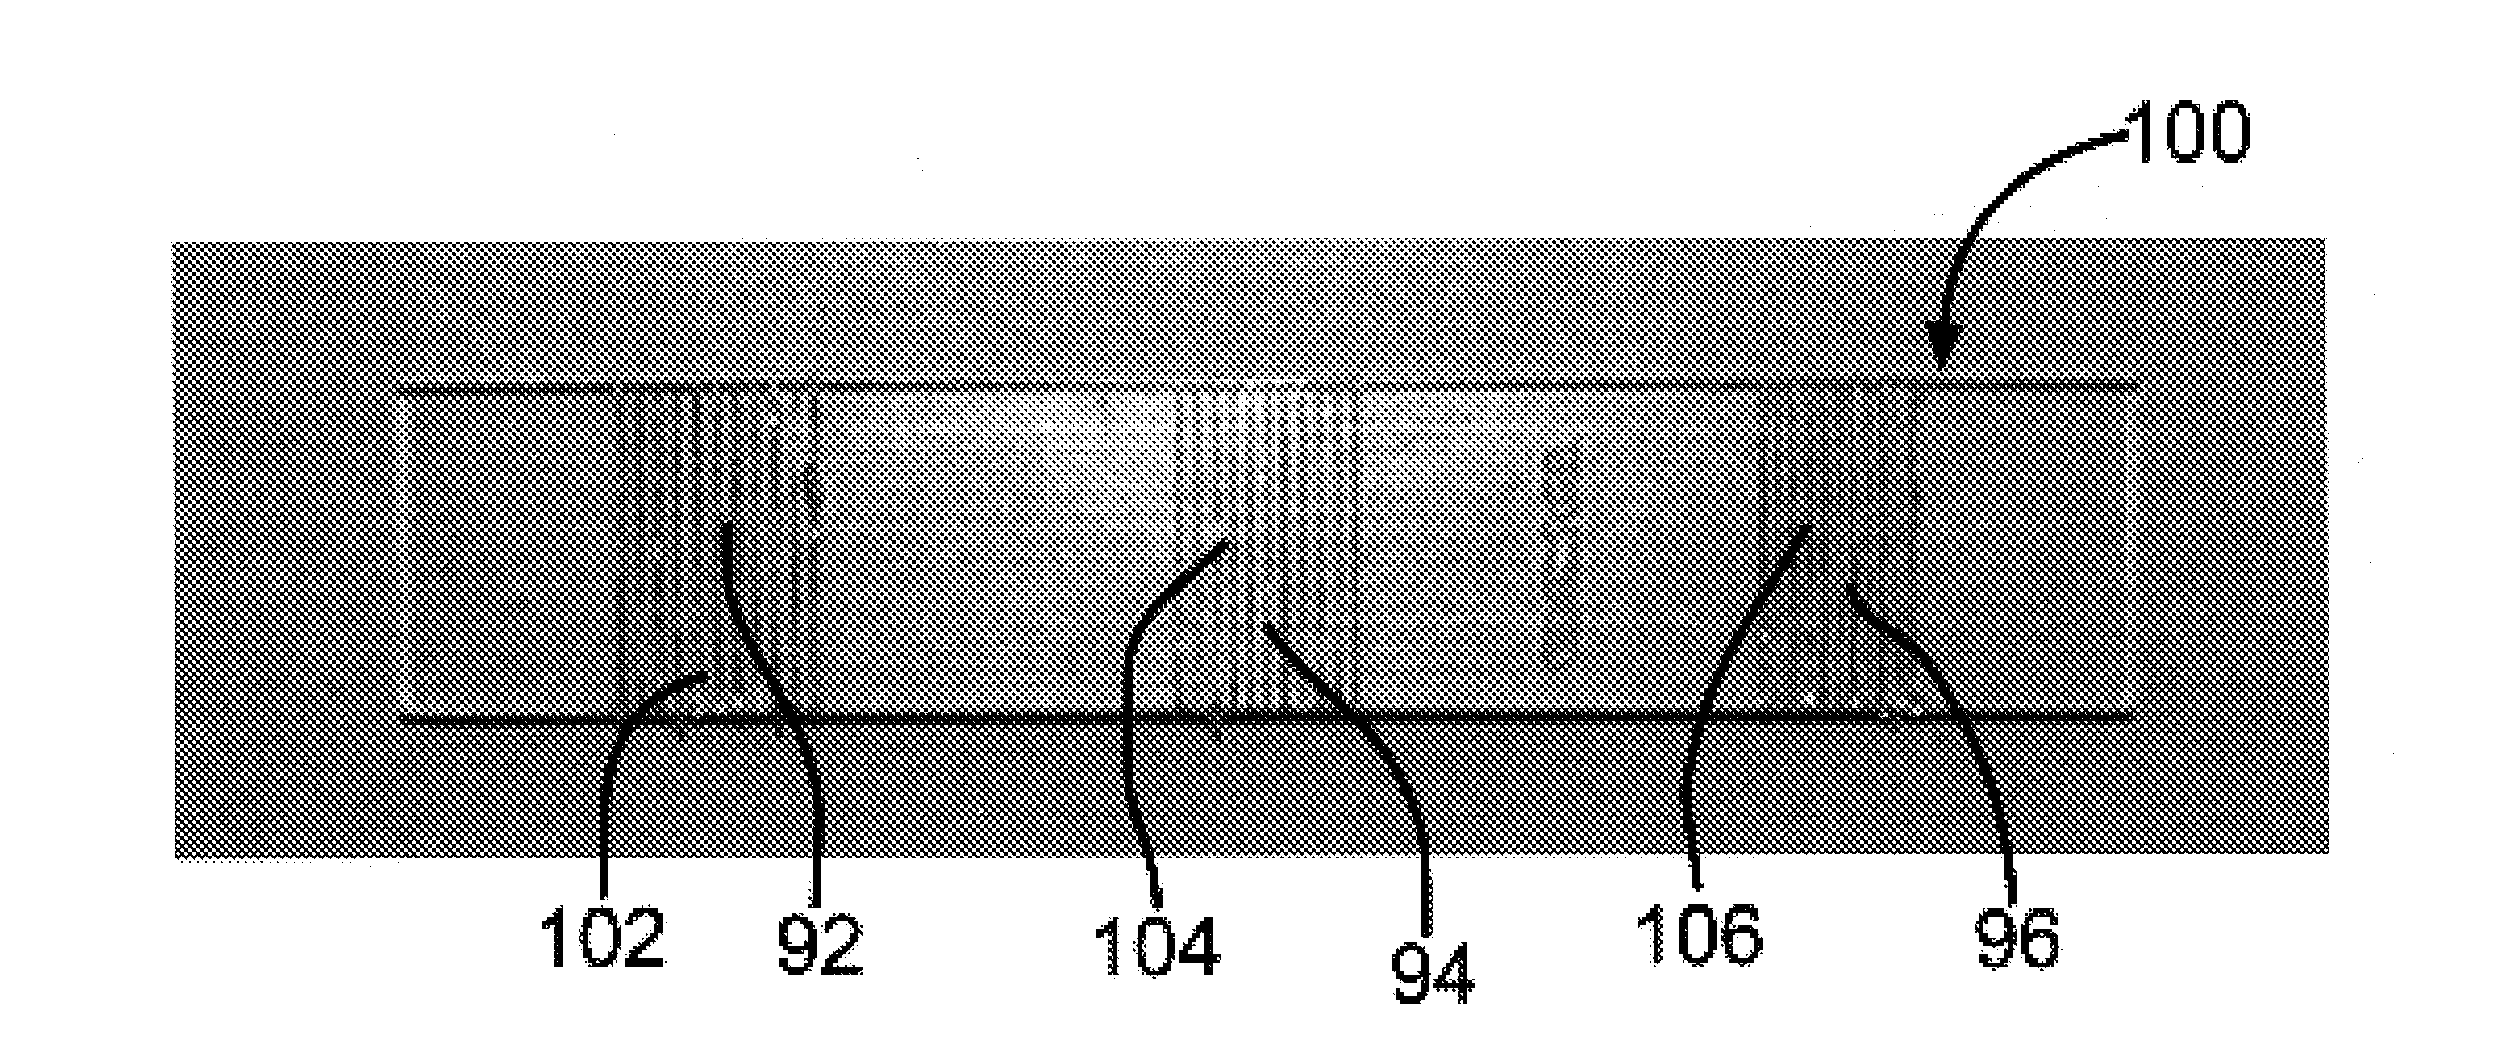 Porosity reference standard utilizing one or more discrete wires